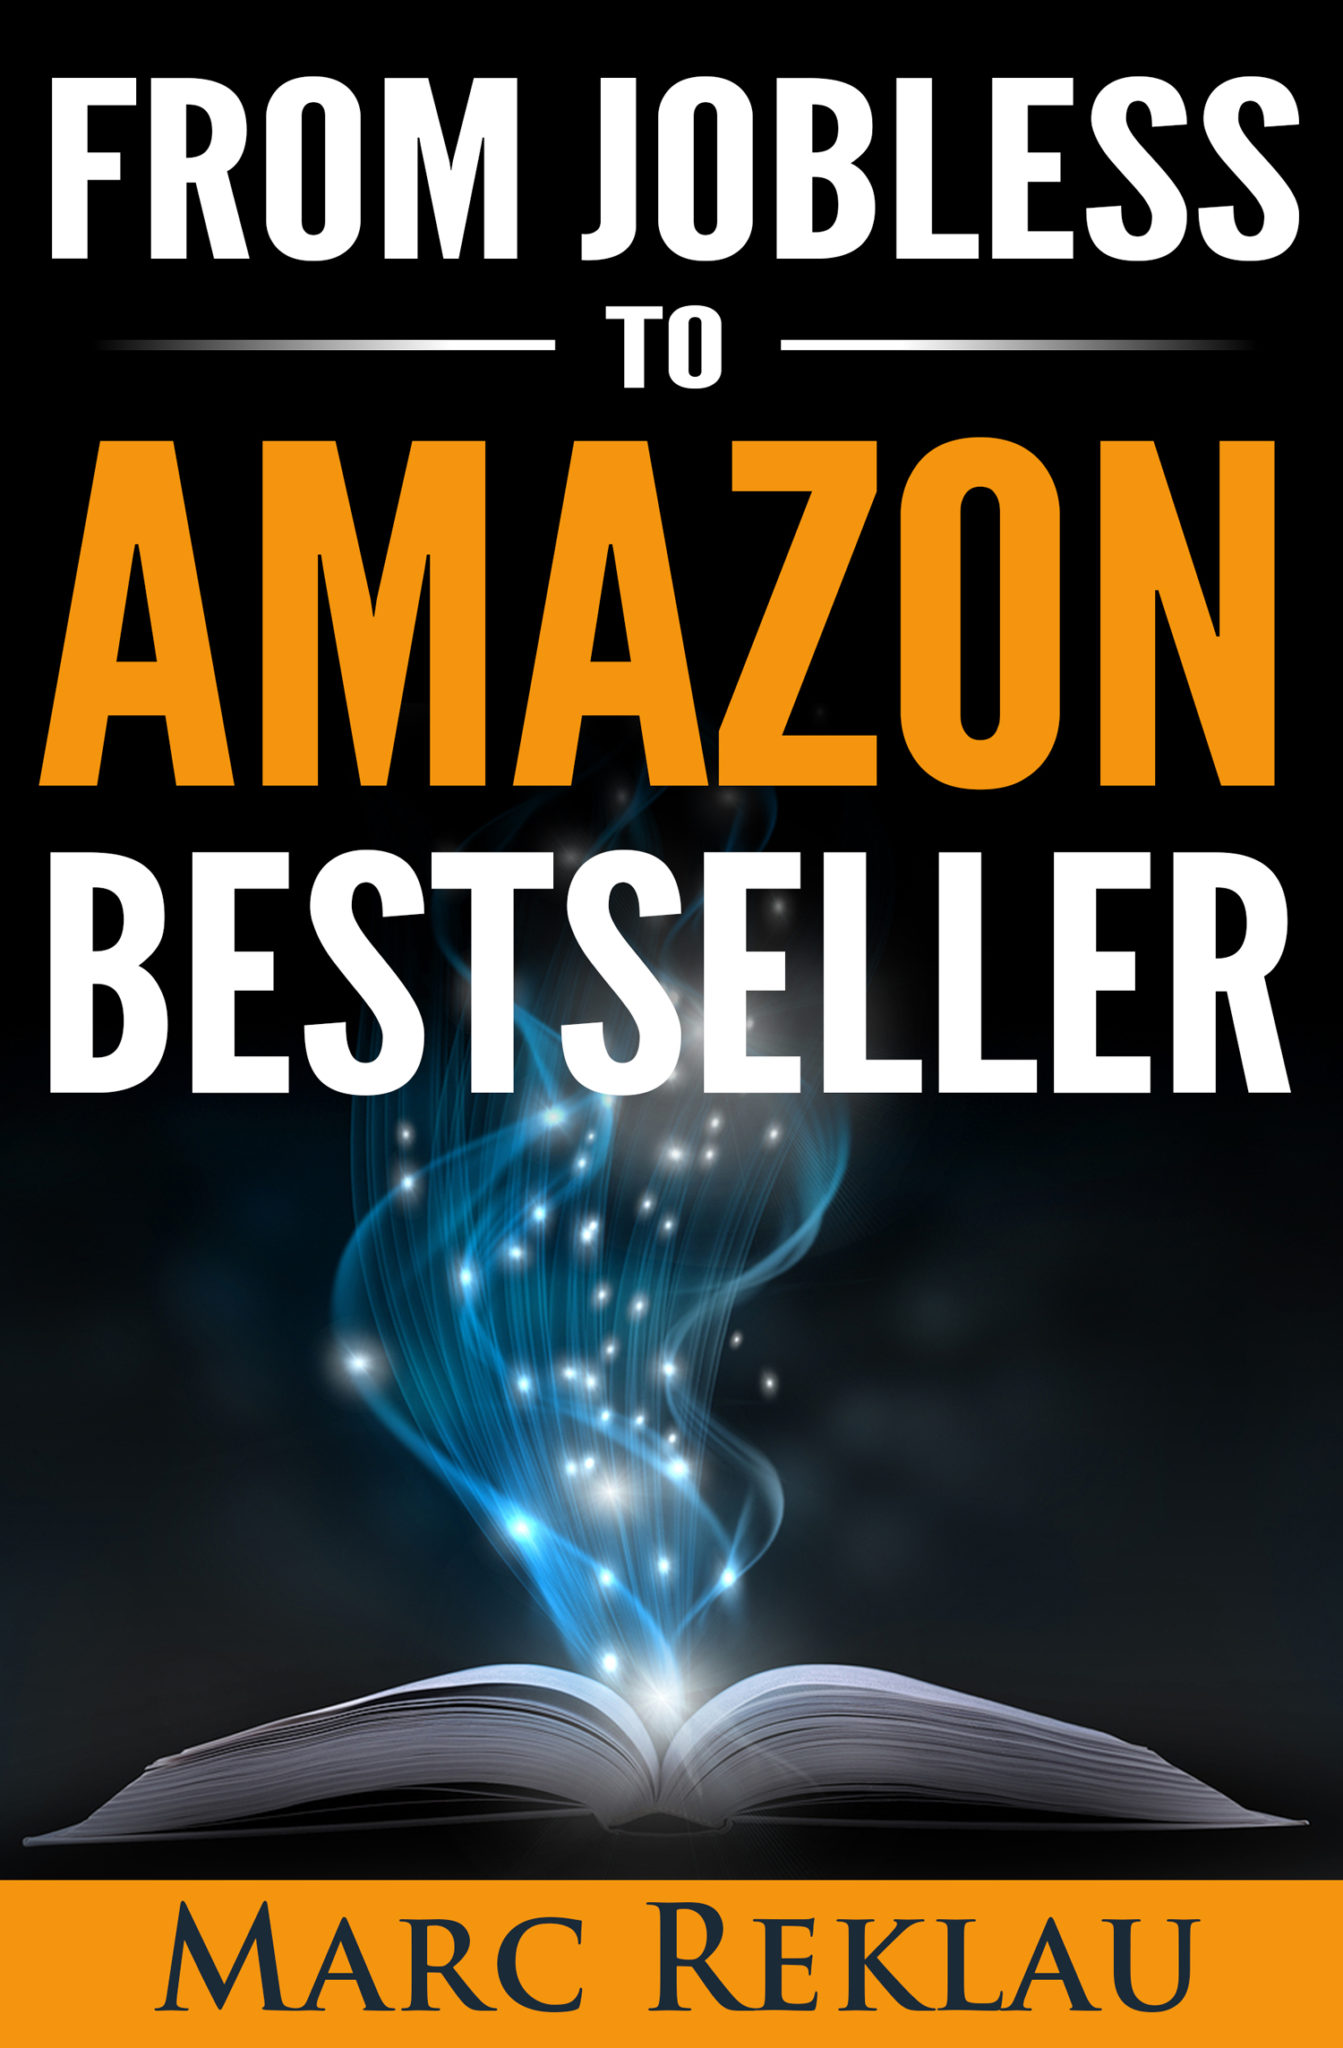 FREE: From Jobless to Amazon Bestseller by Marc Reklau